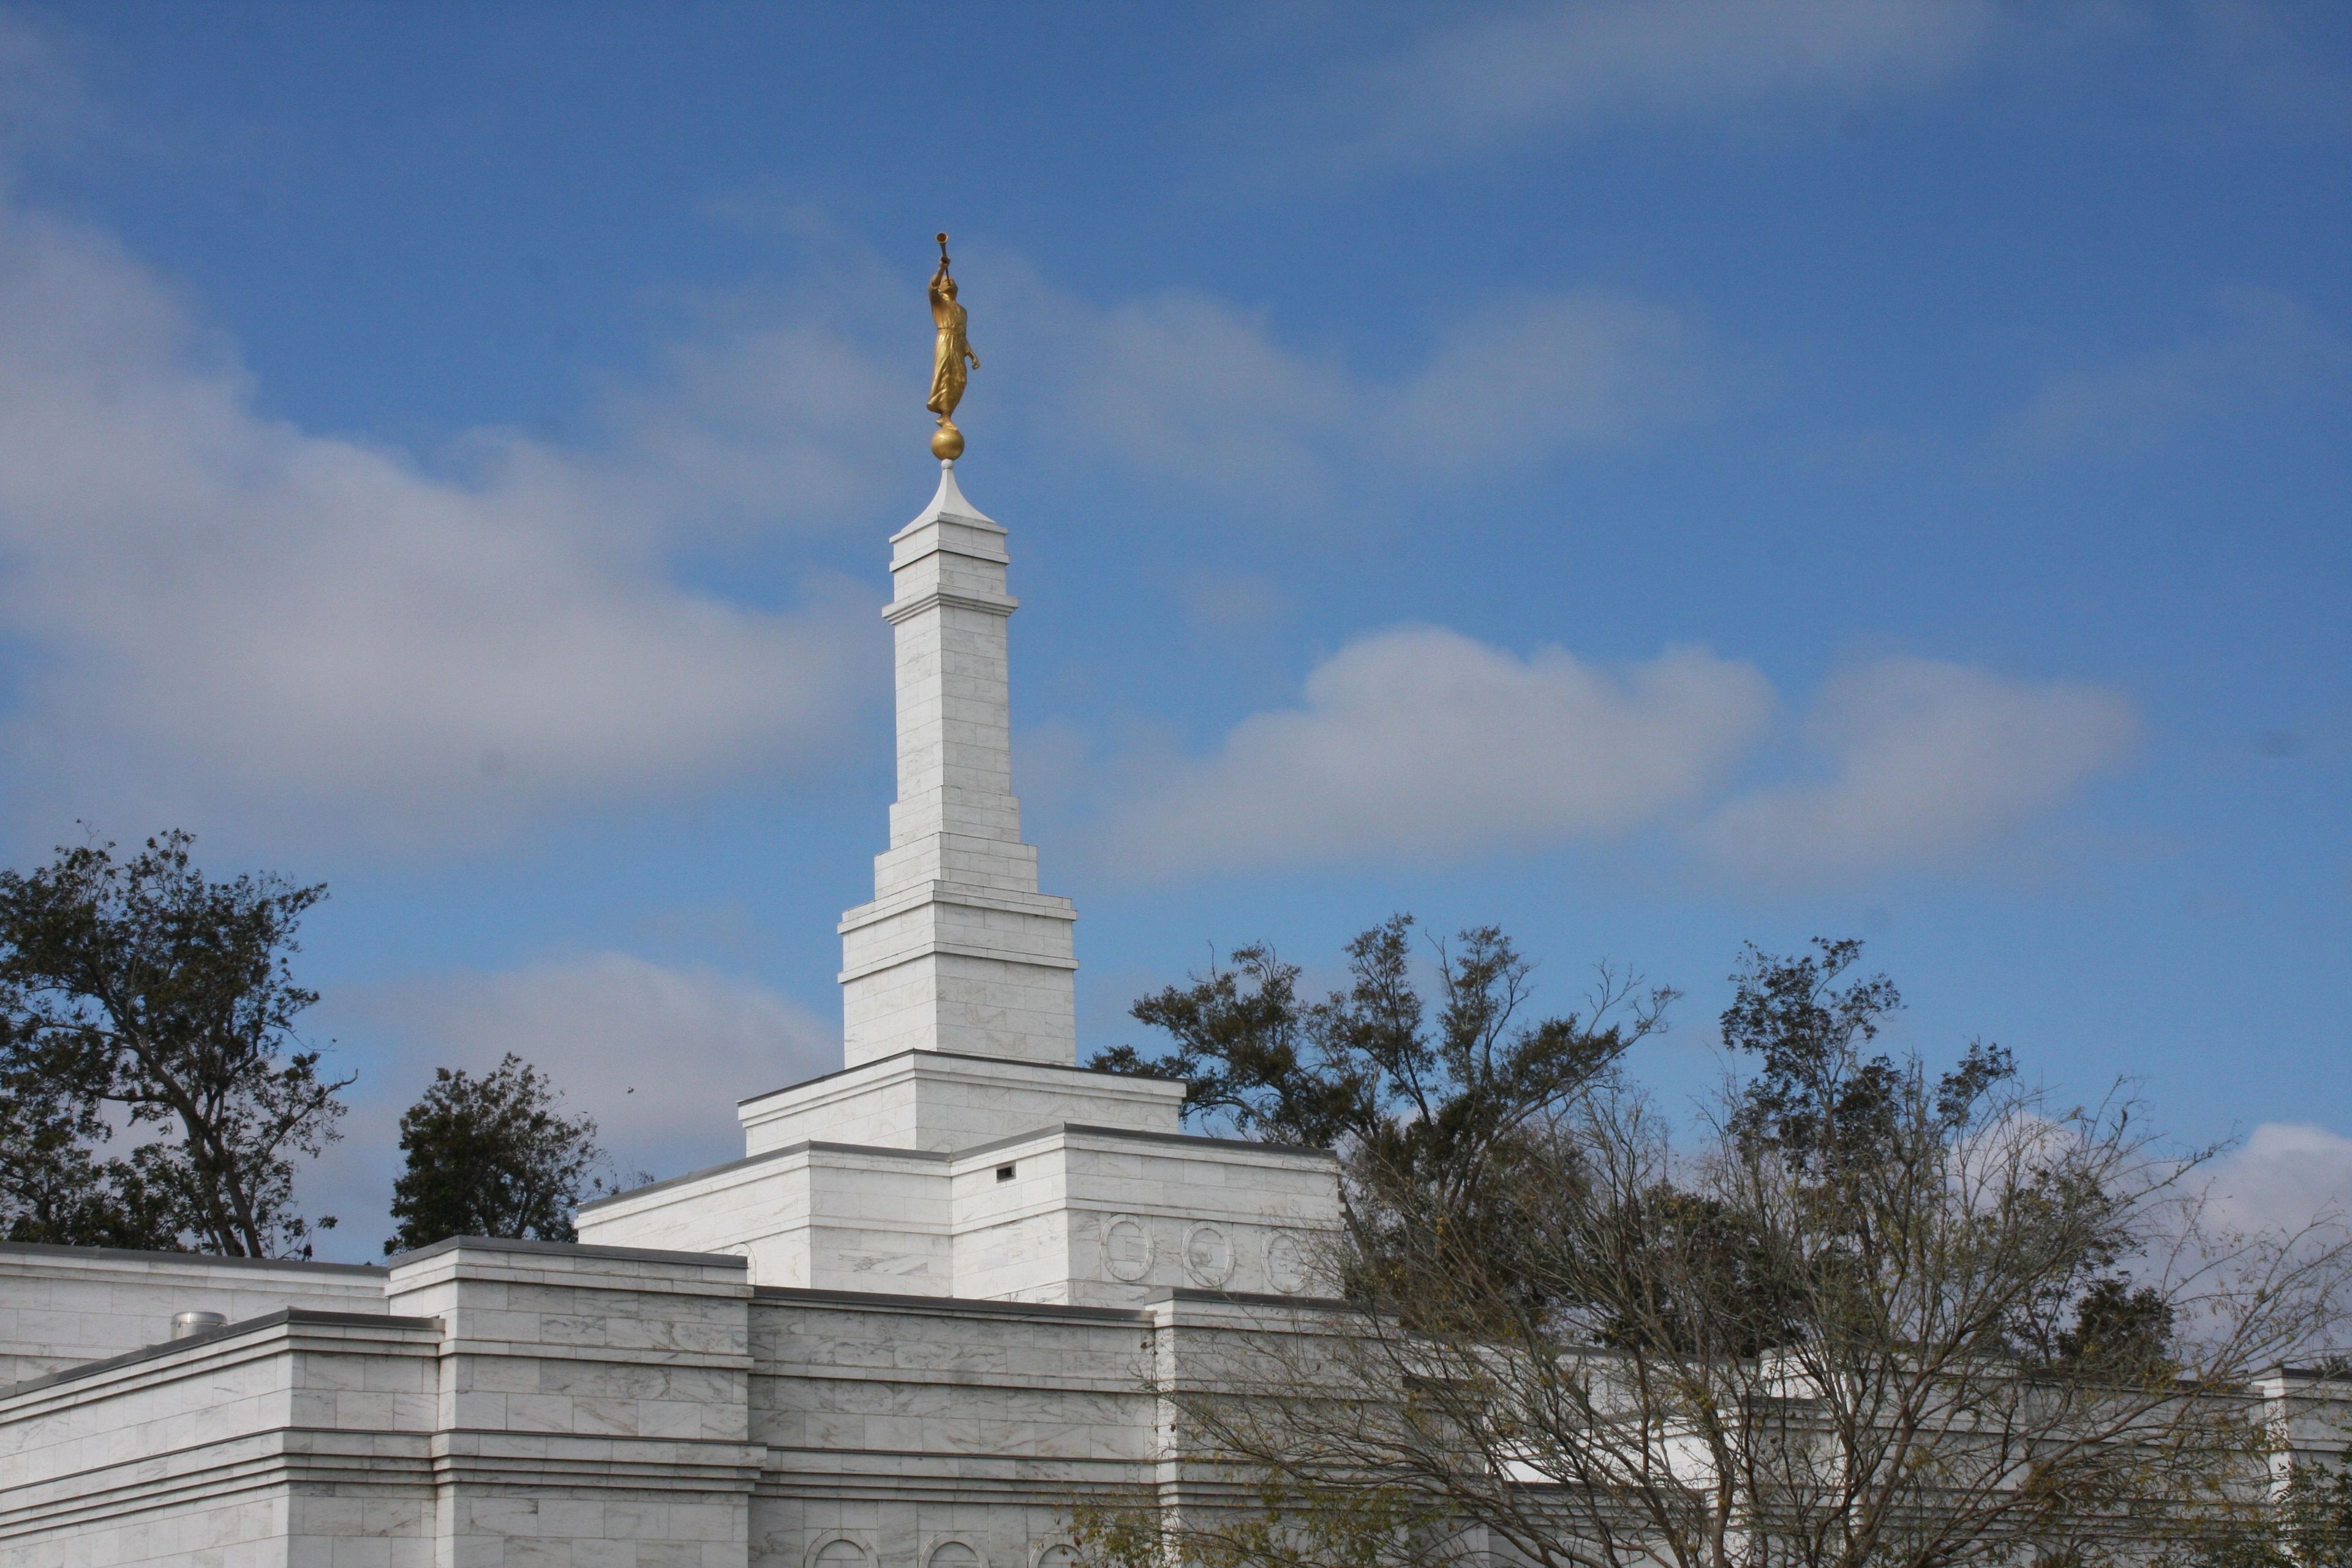 A view of the Baton Rouge Louisiana Temple spire.